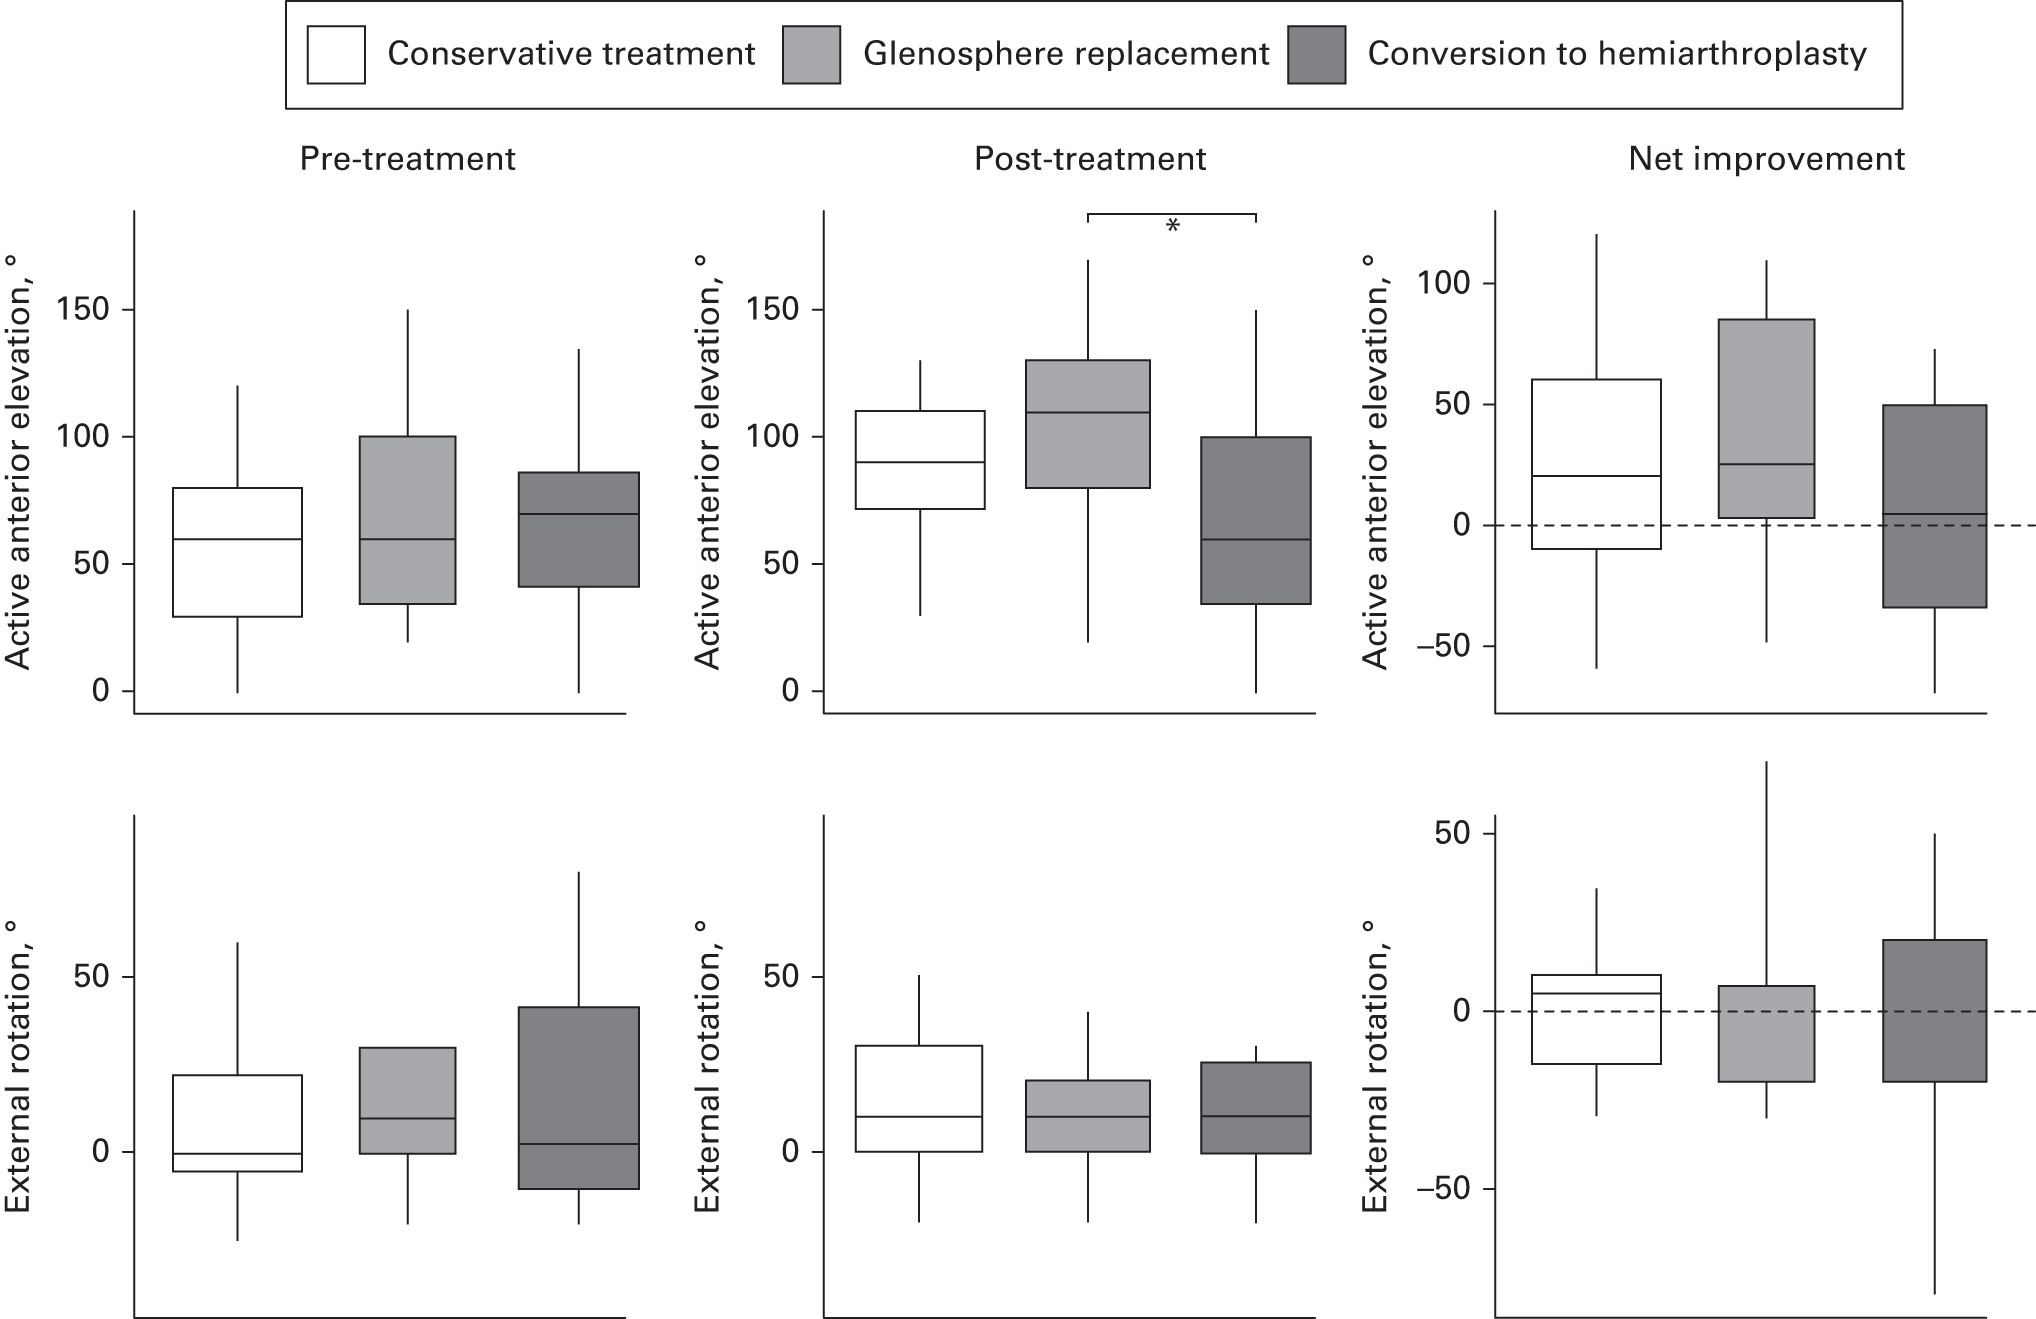 Fig. 4 
          Pre- and post-treatment active anterior elevation and external rotation depending on glenoid loosening treatment (conservative vs glenosphere replacement vs conversion to hemiarthroplasty). The plots illustrate median values (horizontal black lines), interquartile ranges (boxes), 95% confidence intervals (whiskers), and outliers (dots). Asterisks (*) indicate where significant differences were found between groups.
        